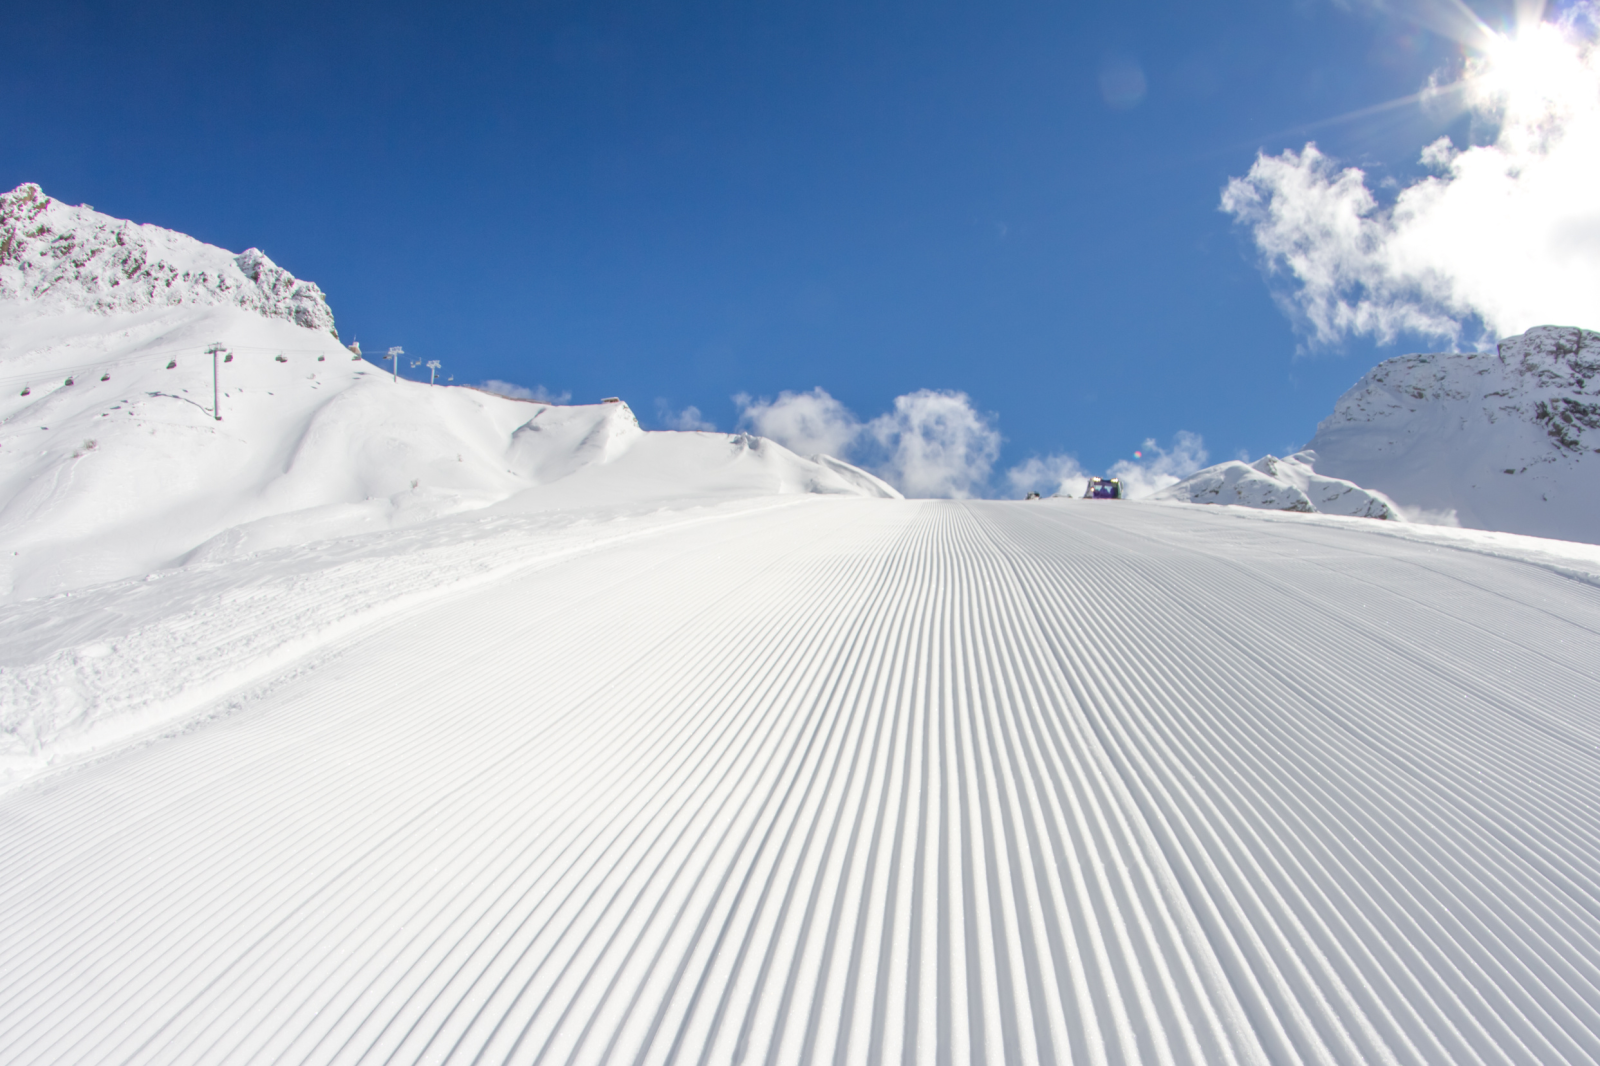 10 top tips to avoid crowds during busy periods on the slopes!